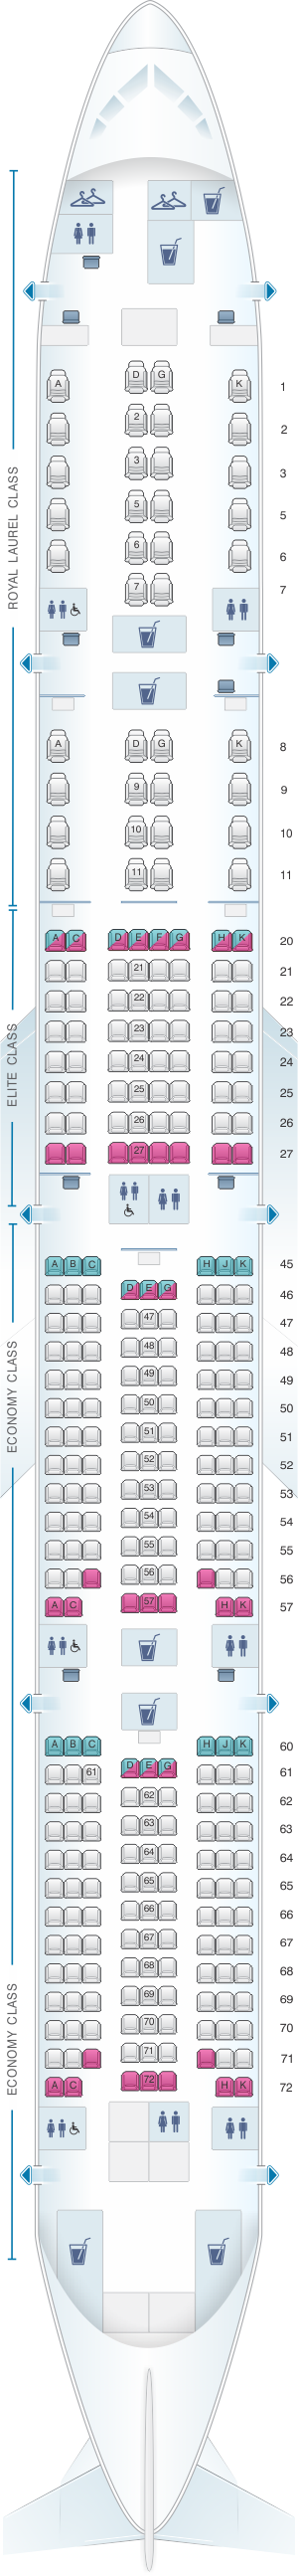 air canada boeing 777 300er seating map